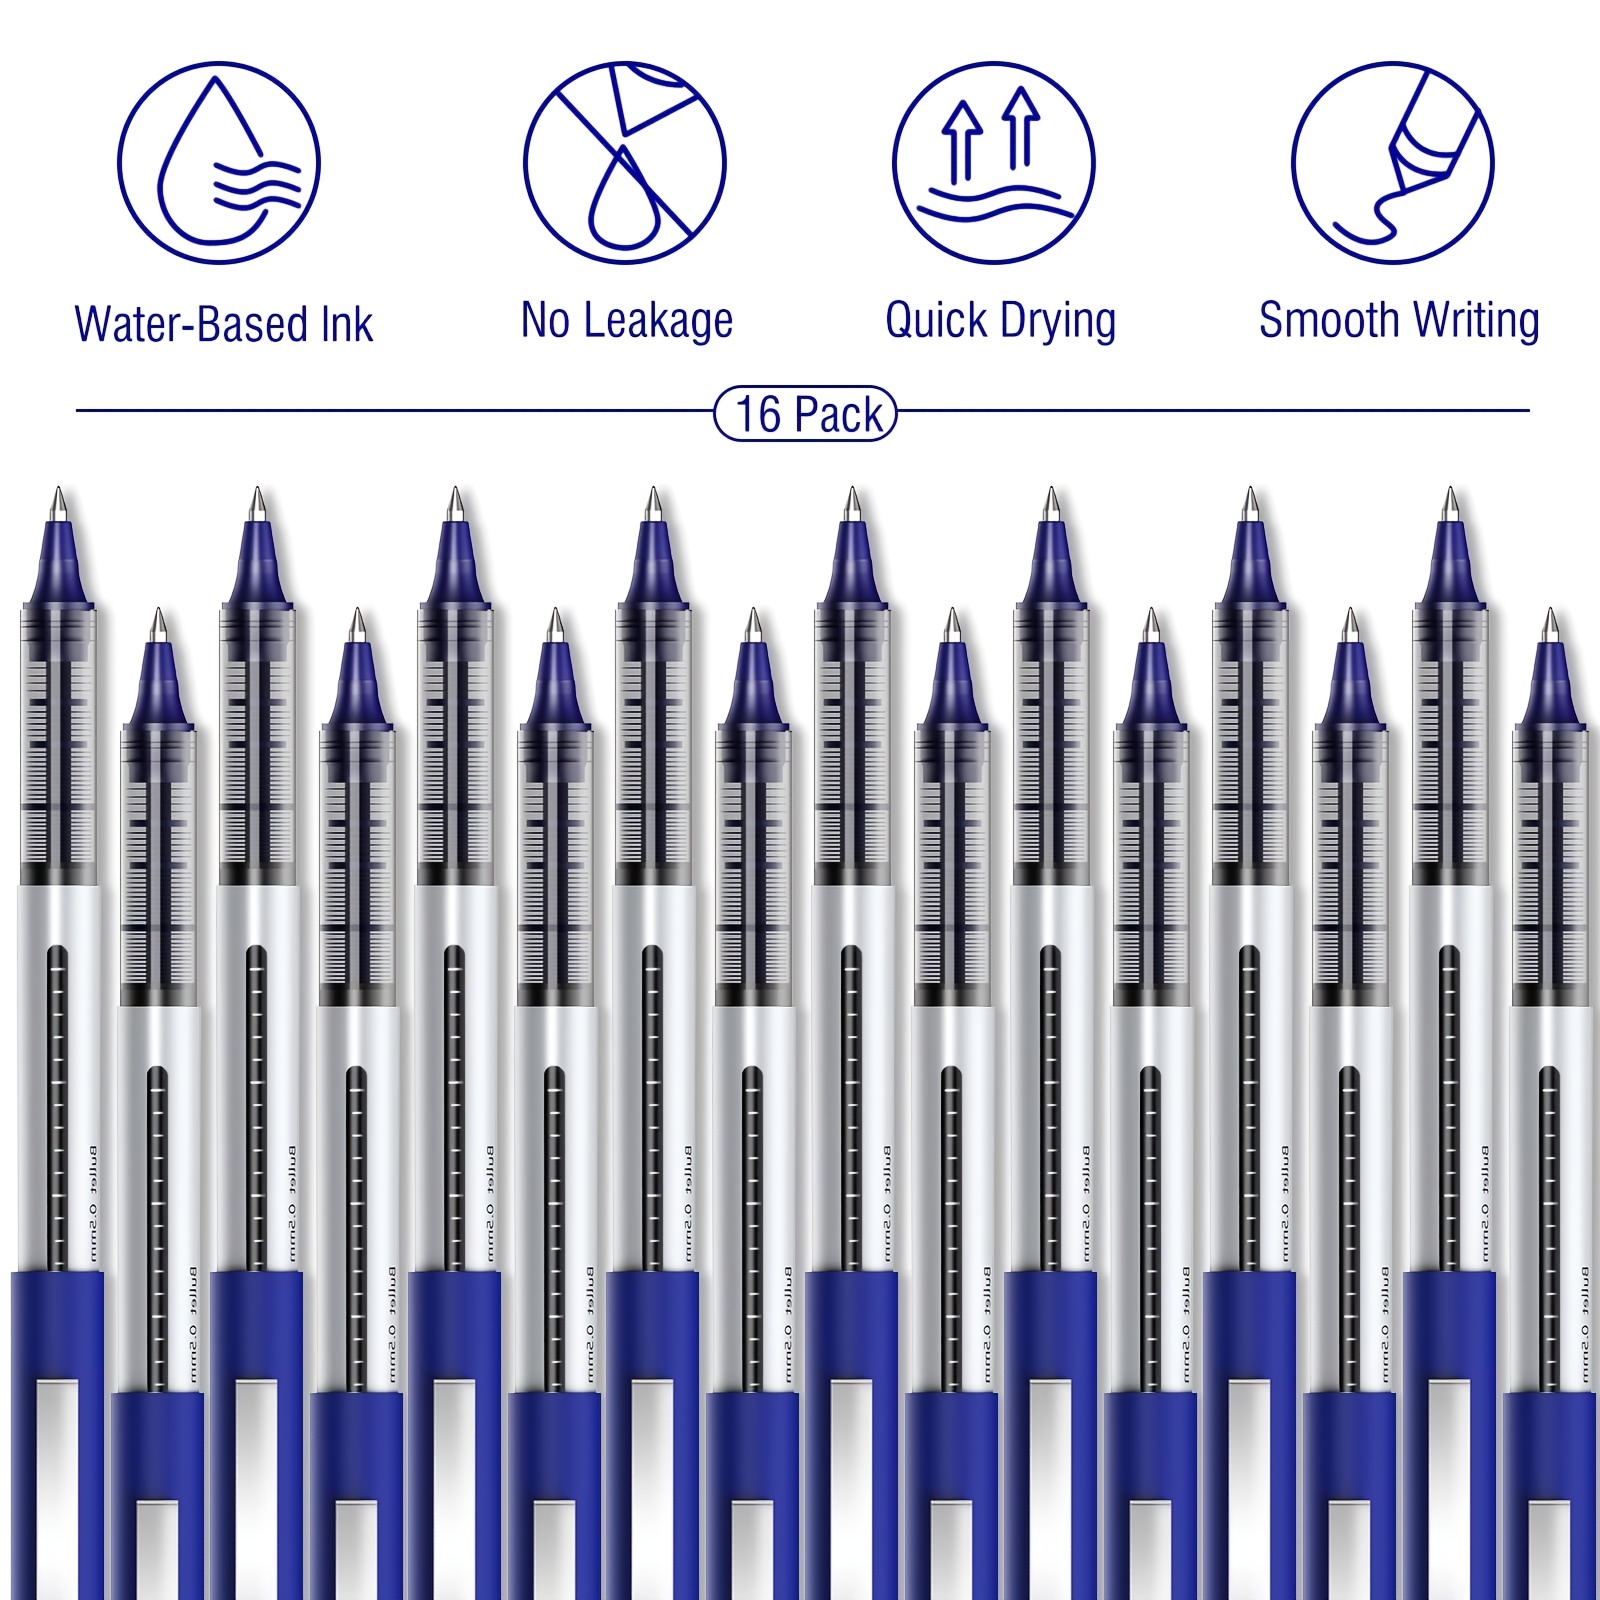 Rolling Ball Pens 0.5 Mm Extra Fine Point